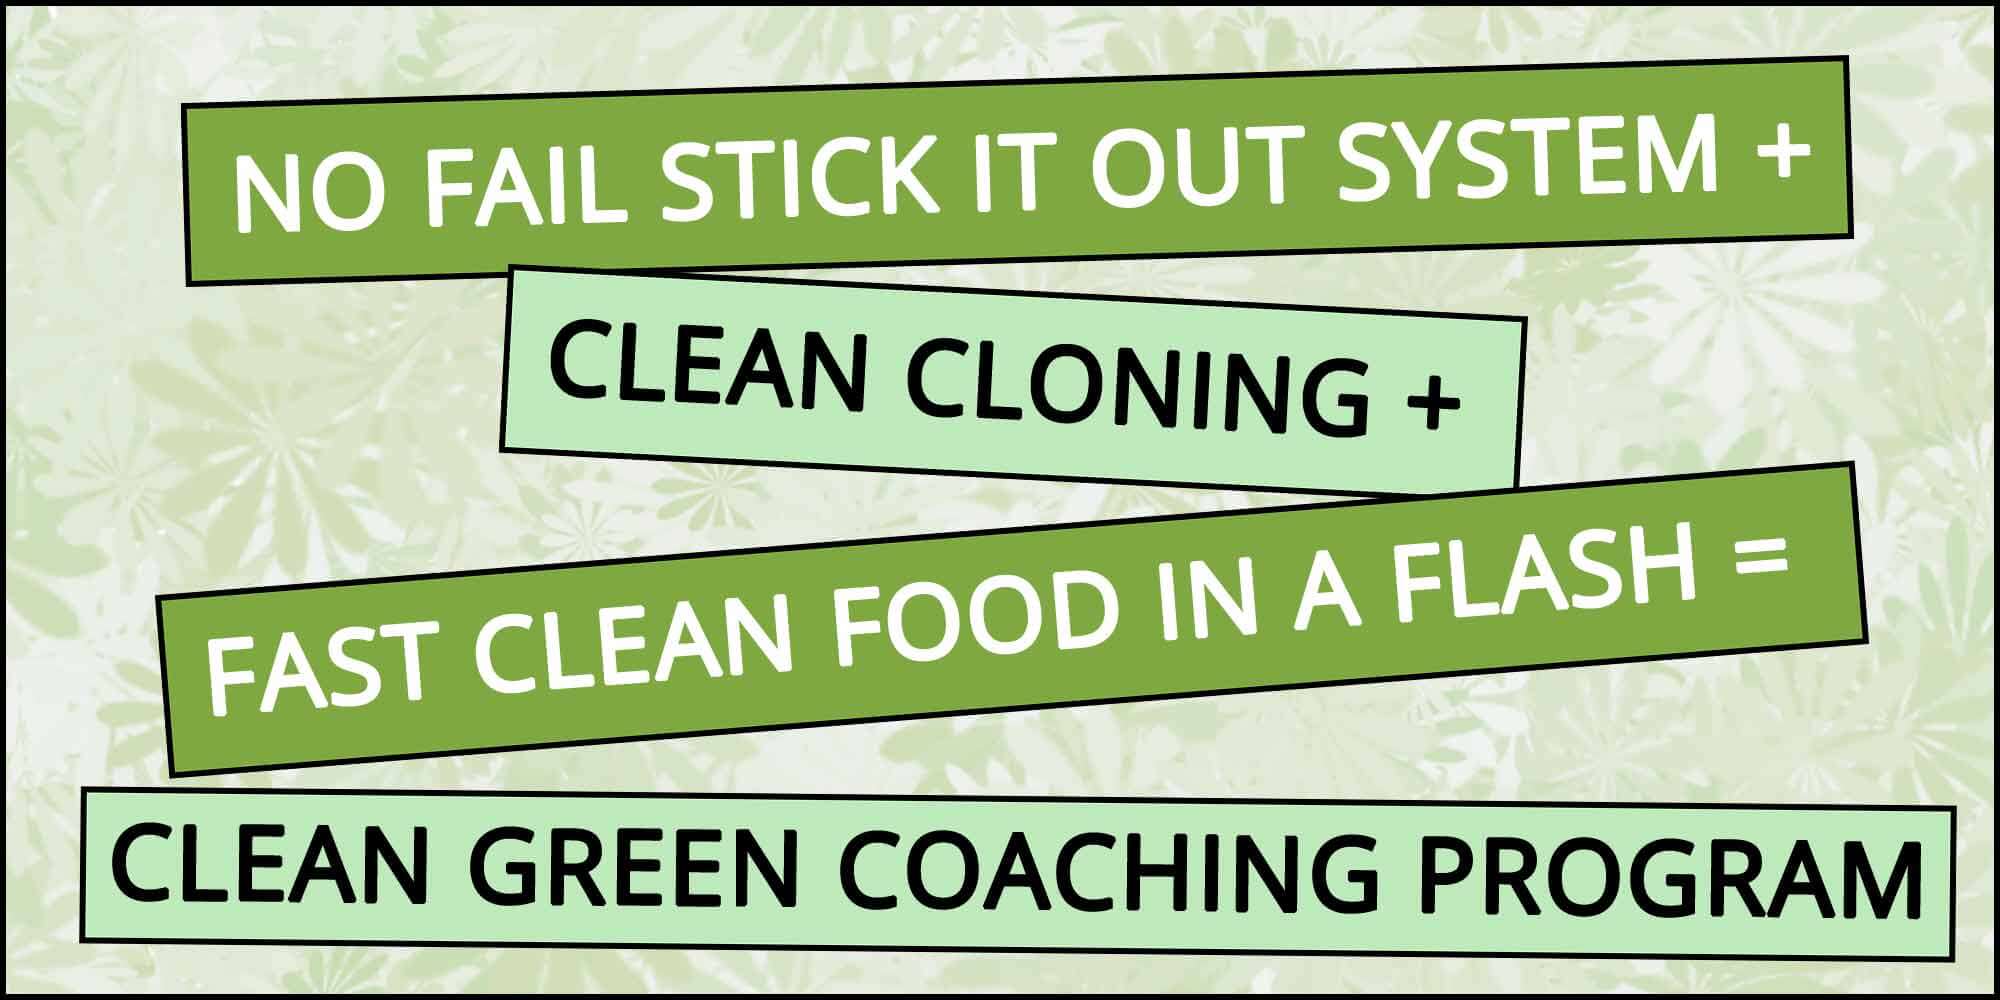 NO FAIL STICK IT OUT SYSTEM + CLEAN CLONING + FAST CLEAN FOOD IN A FLASH = CLEAN GREEN COACHING PROGRAM